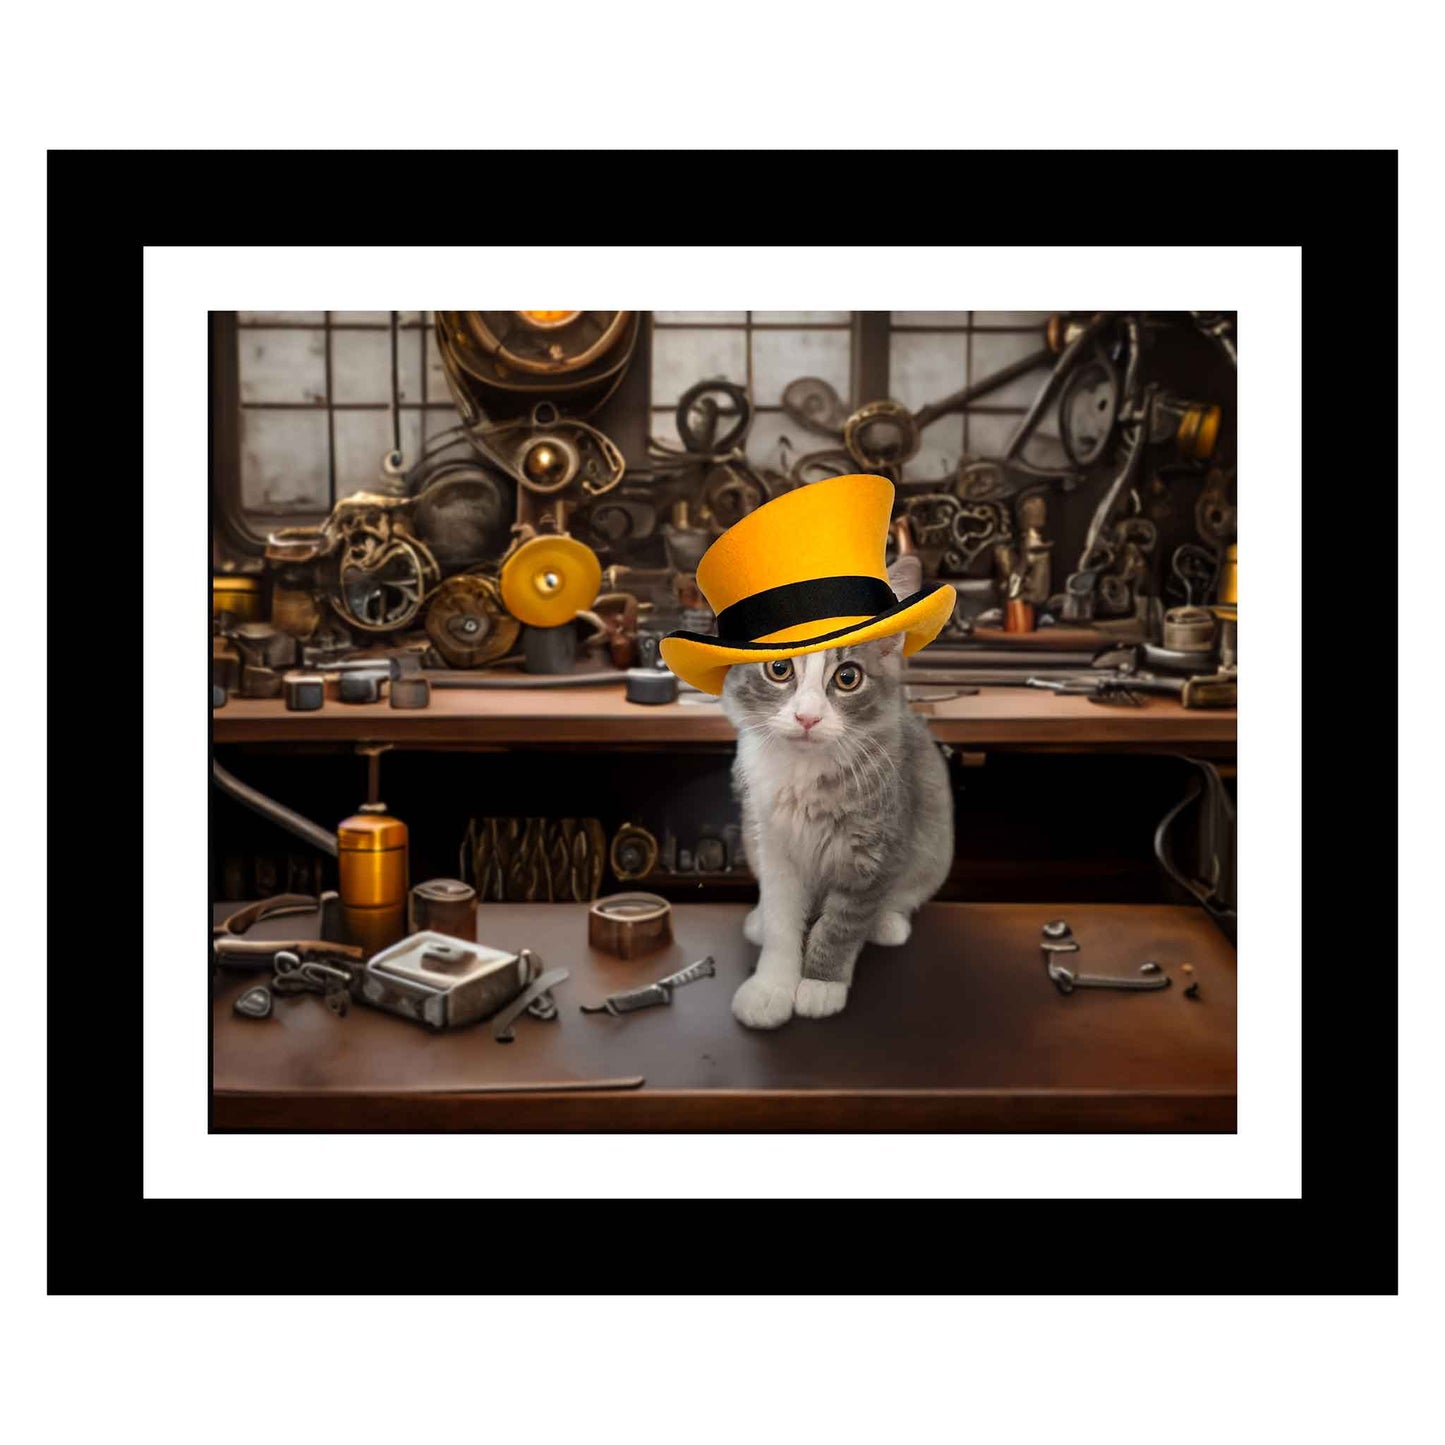 Charles Dean Carpino, Curiosity, Cat, Feline Curiosity, photograph, Fiona of Punking Wharf, kitten, computer-generated backdrop, steampunk hat, yellow hat, hat, colorful, 8 x 10 matted to 11 x 14